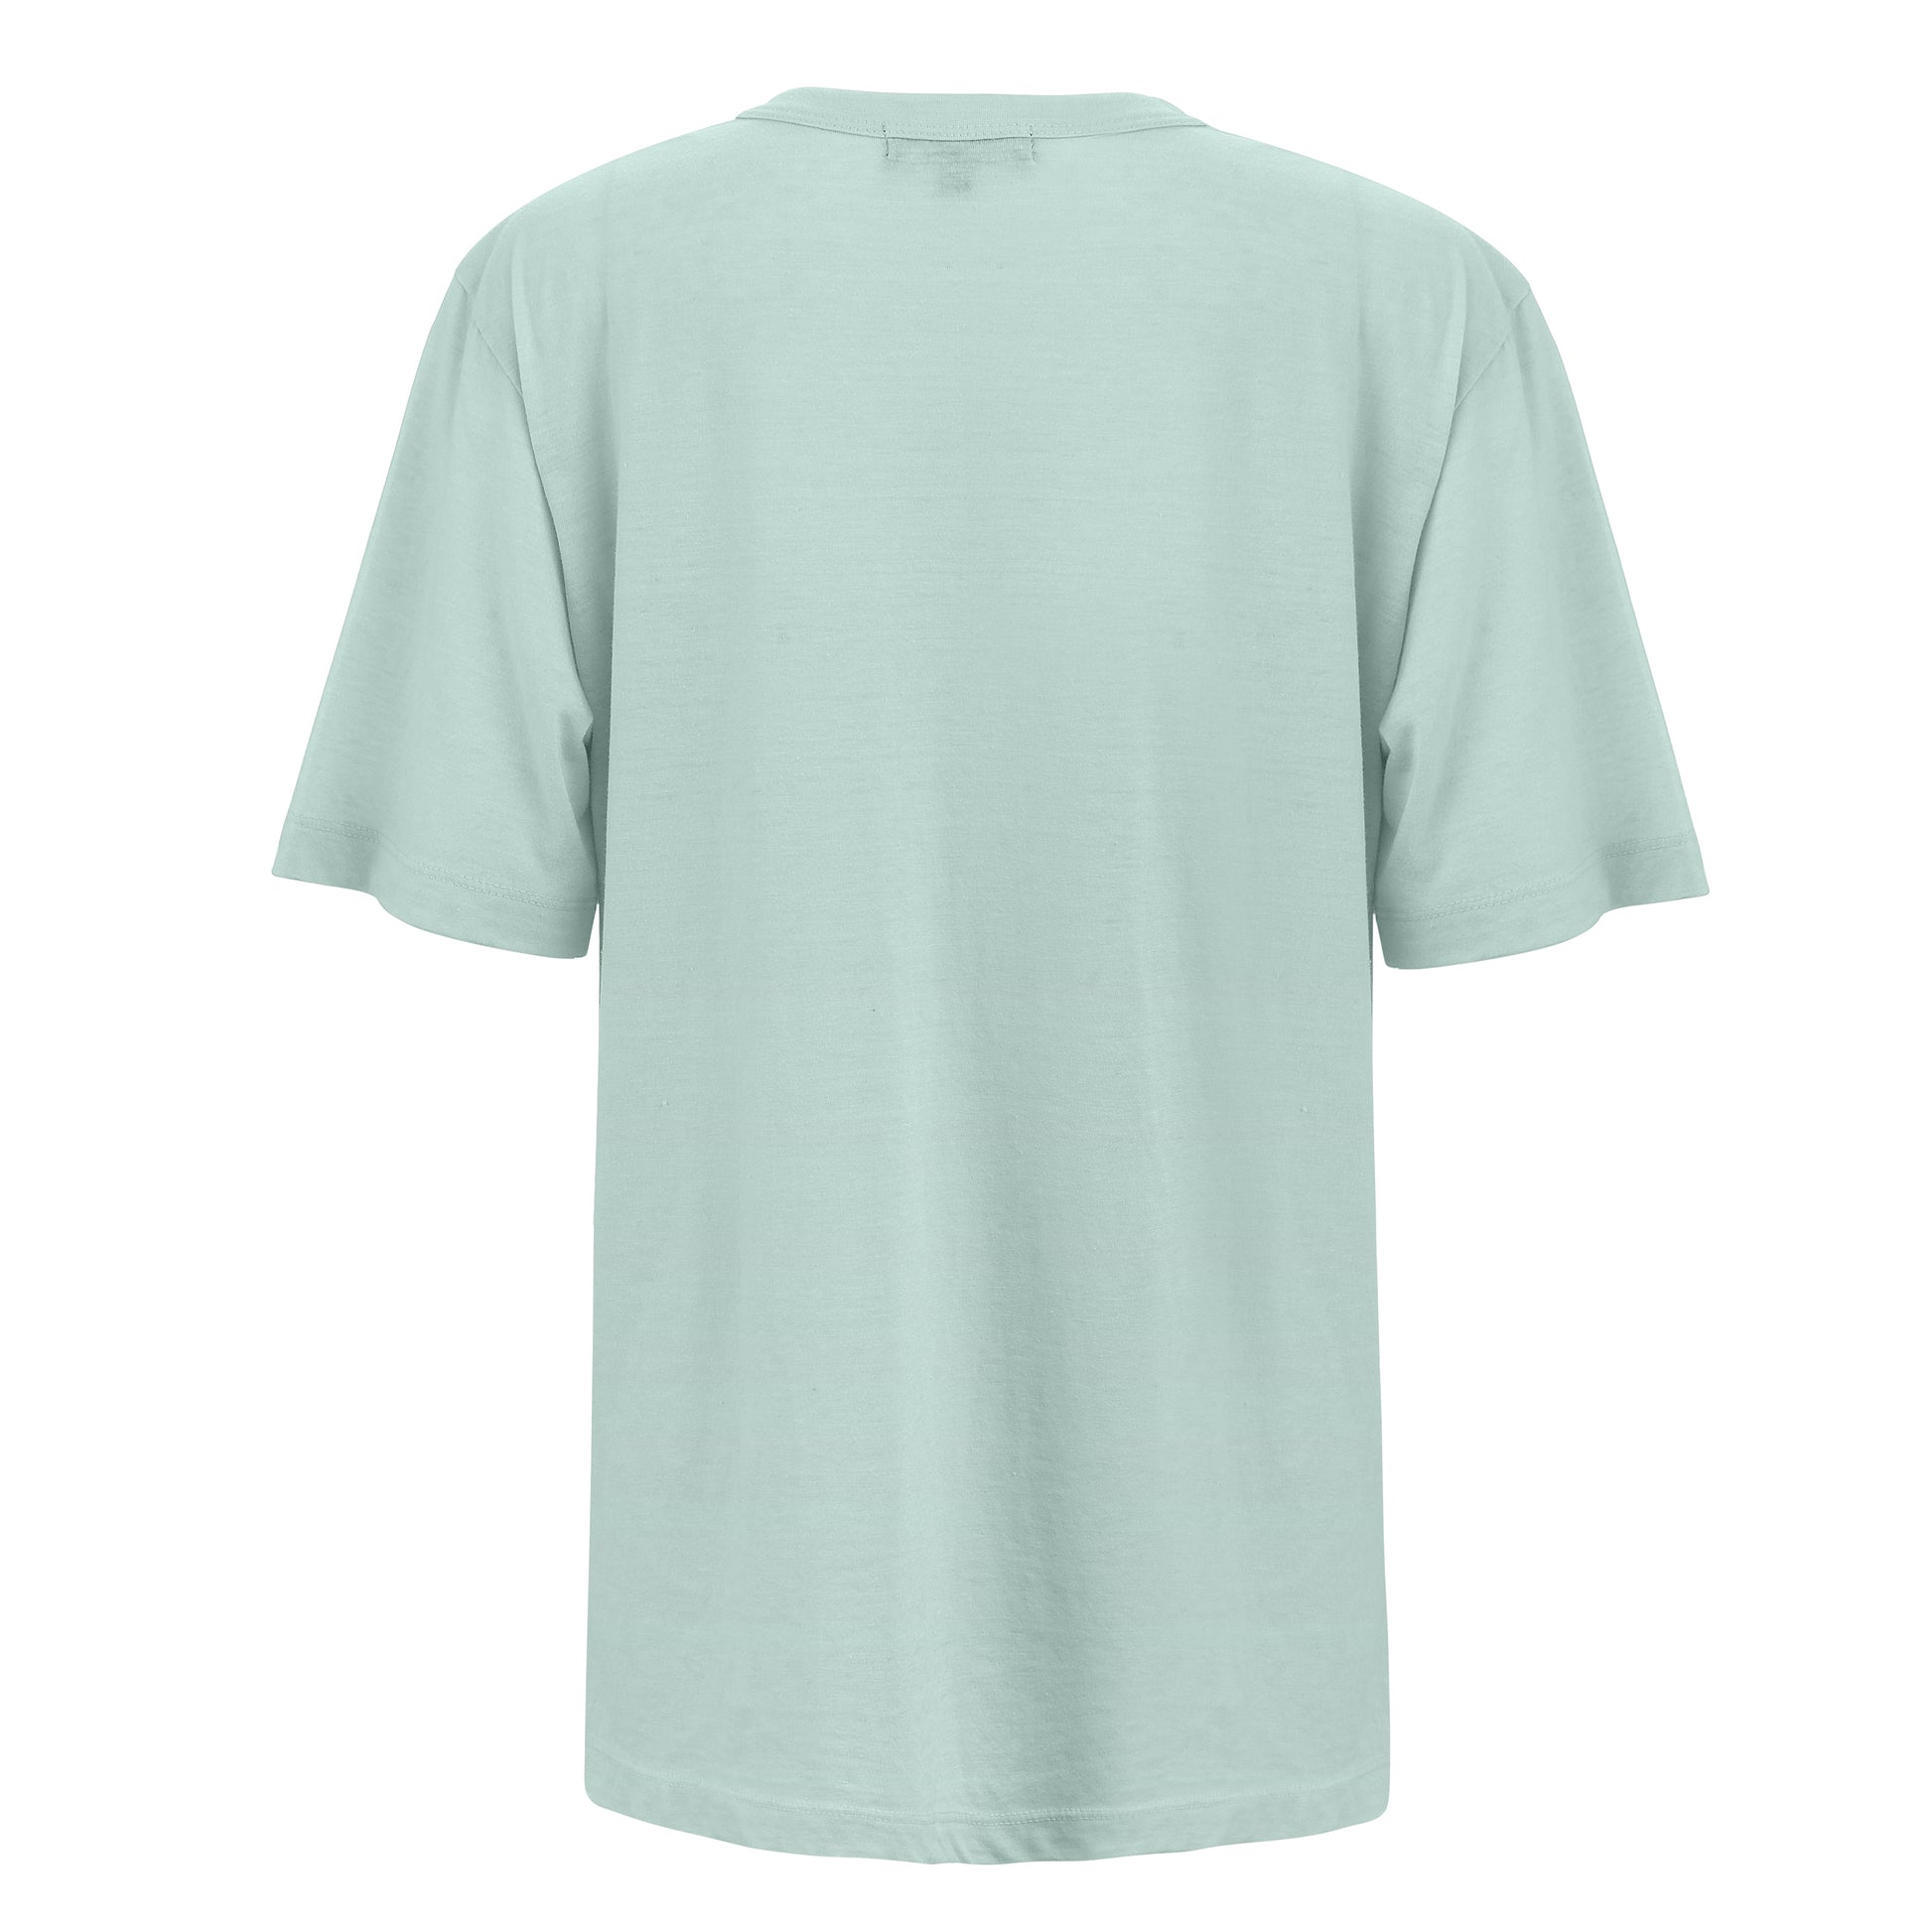 Made in the USA Oversize Fit T-Shirt. Made with a unique composition of 25% Modal, 50% Combed Cotton, and 25% Polyester, this shirt offers a luxurious feel with enhanced resilience. This sky blue short sleeve features a Pacific Ocean coastline graphic. Inspired by the Pacific North West. Back View.